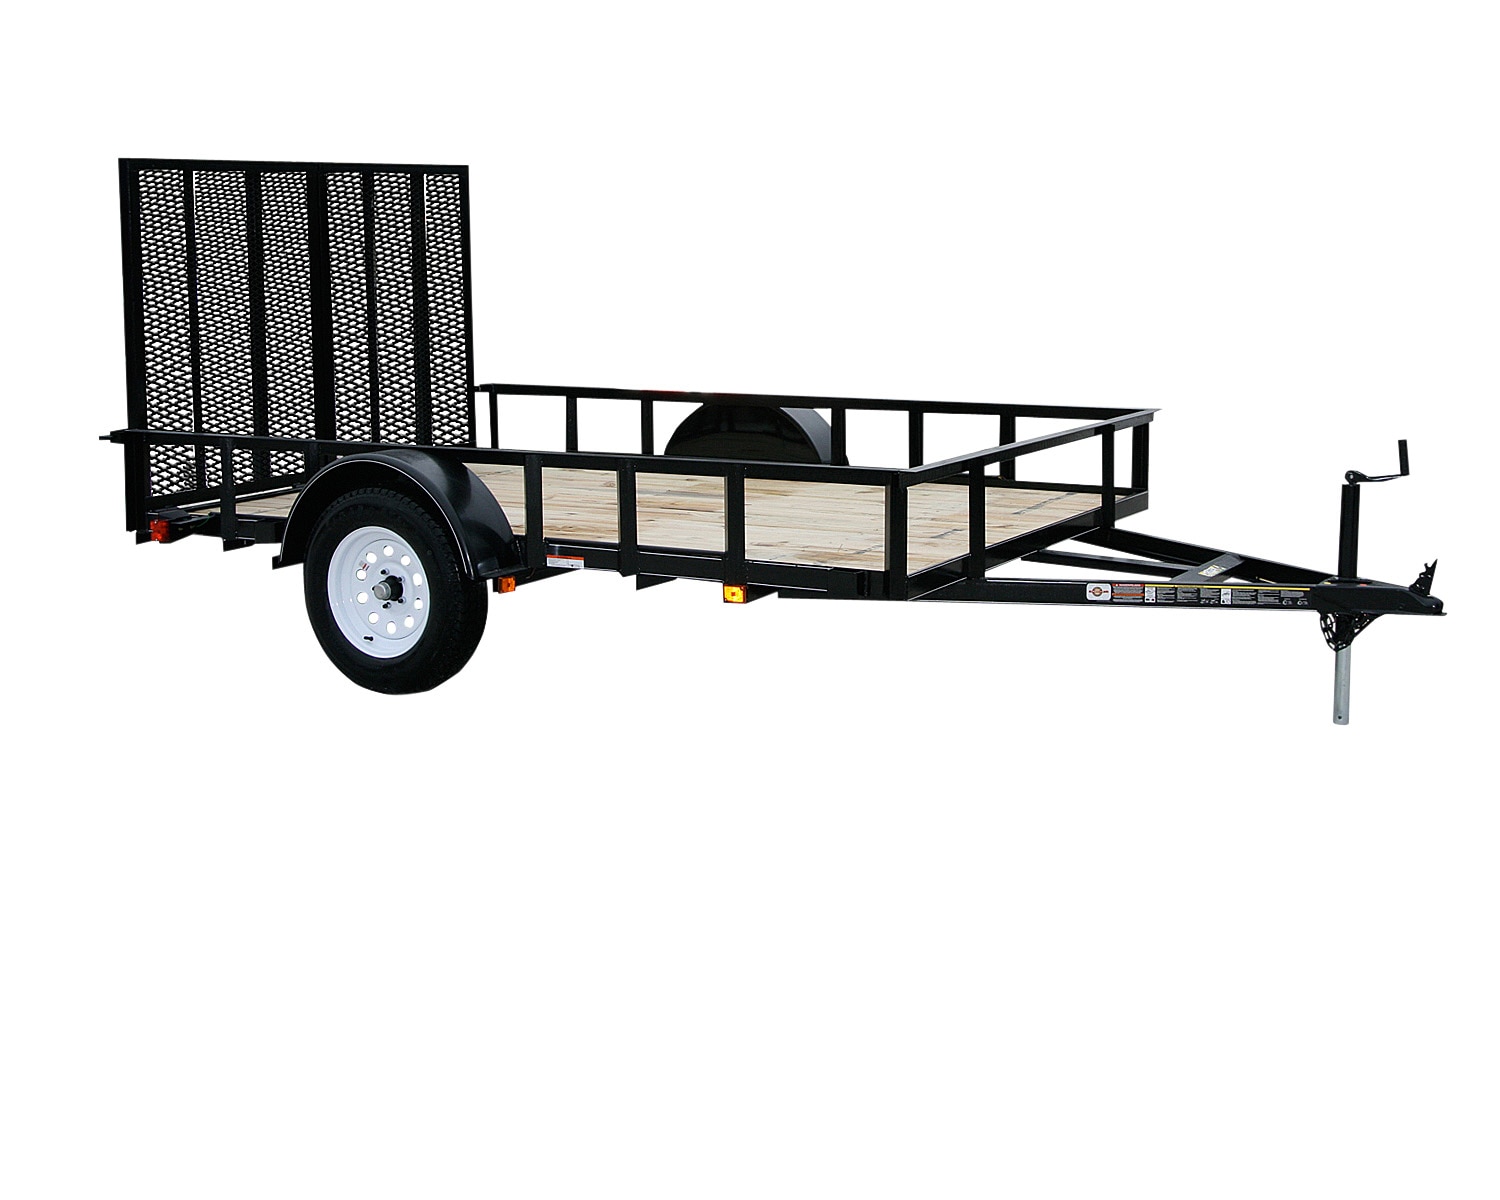 tractor supply truck and trailers